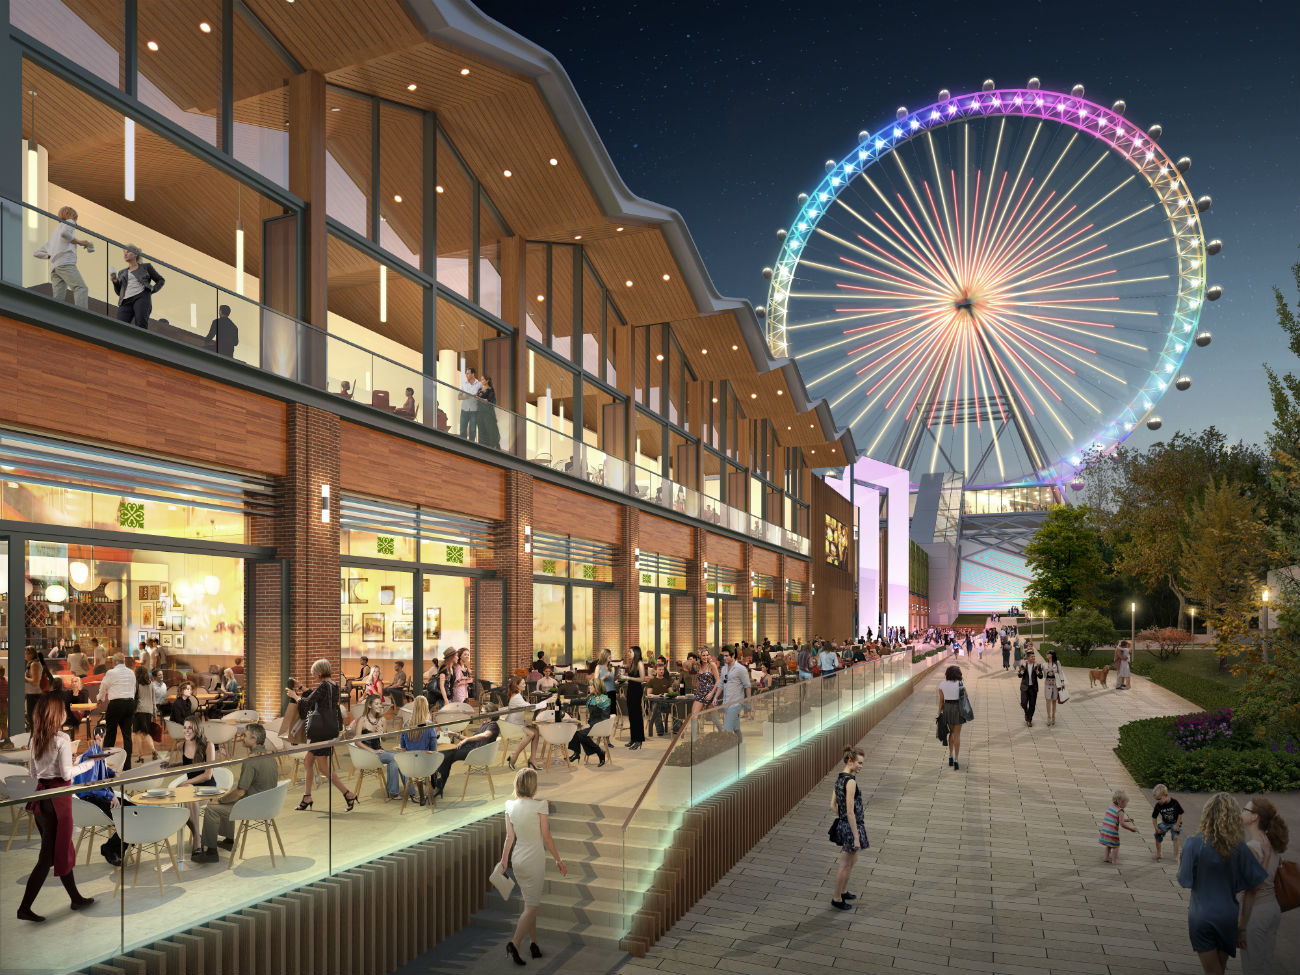 The Moscow wheel will be designed by the architectural firm, Chapman Taylor, and Intamin AG, the Swiss engineering company and maker of equipment for amusement parks.